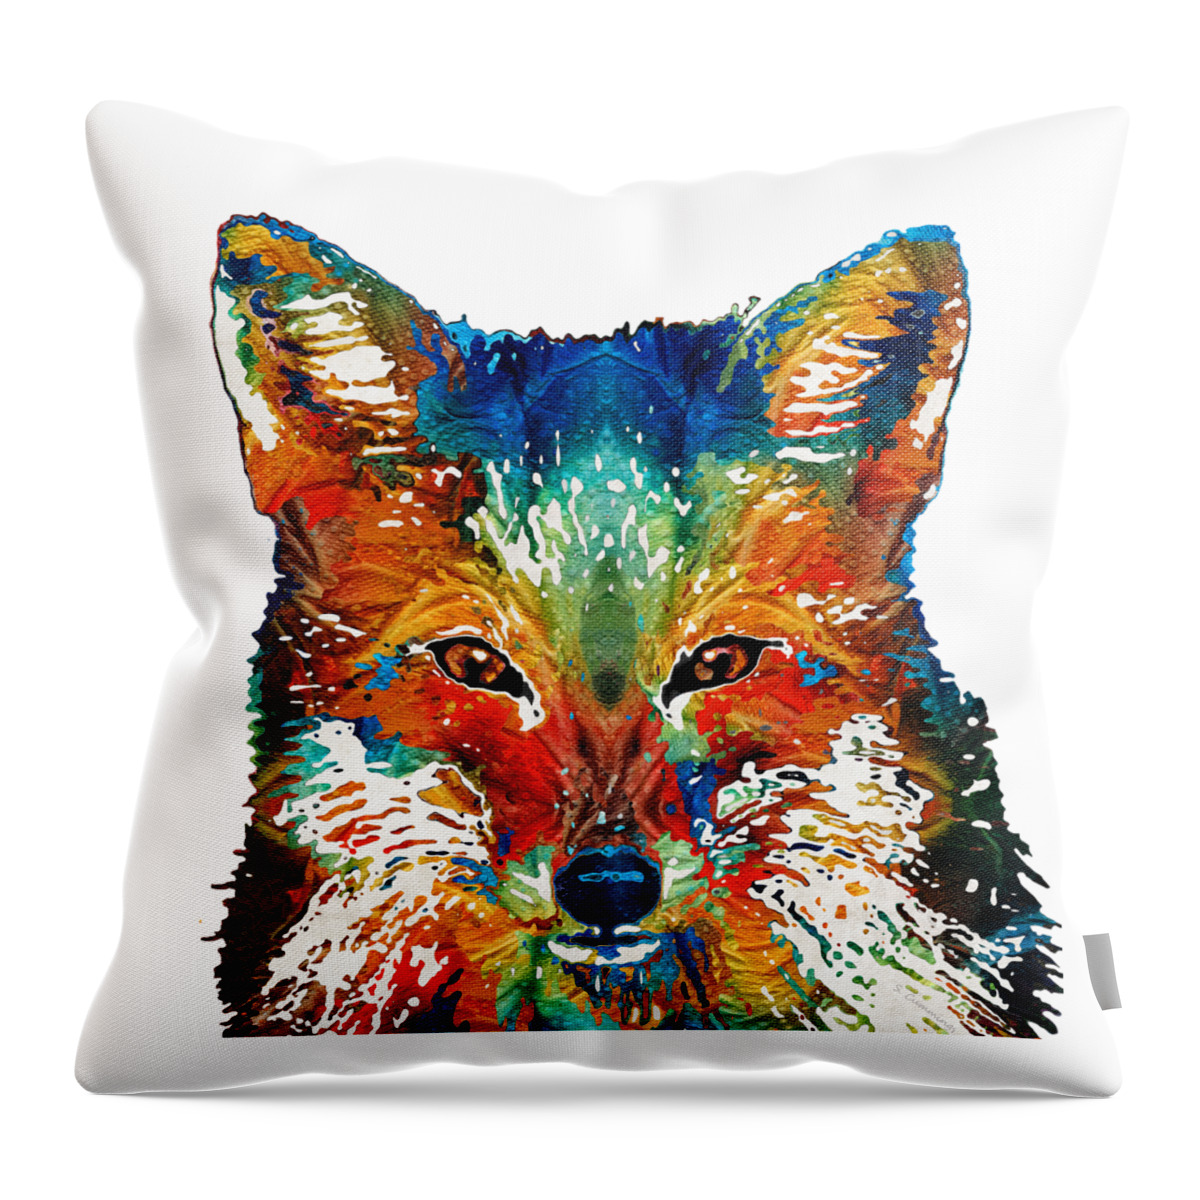 Fox Throw Pillow featuring the painting Colorful Fox Art - Foxi - By Sharon Cummings by Sharon Cummings